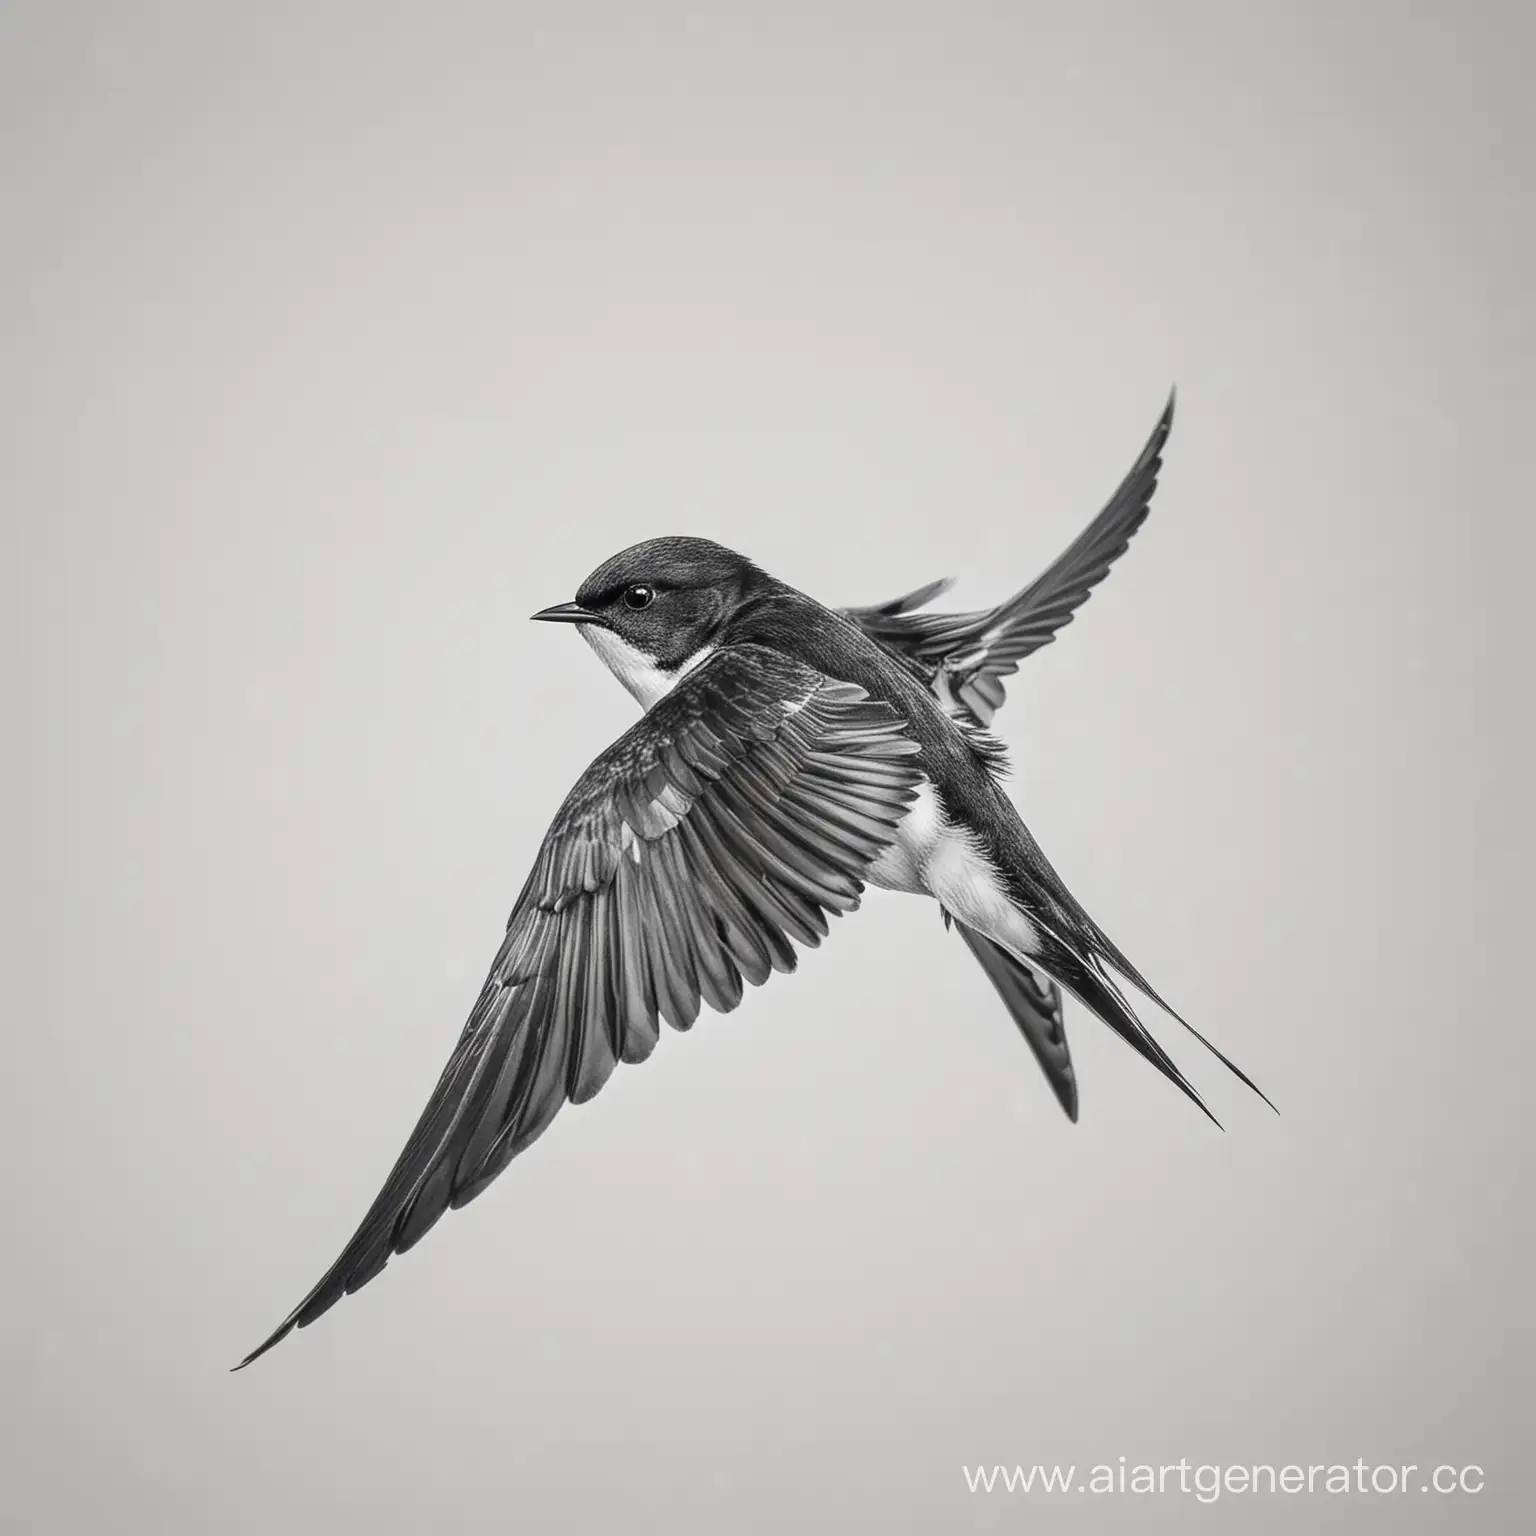 Black-and-White-Swallow-Bird-Flying-Against-White-Background